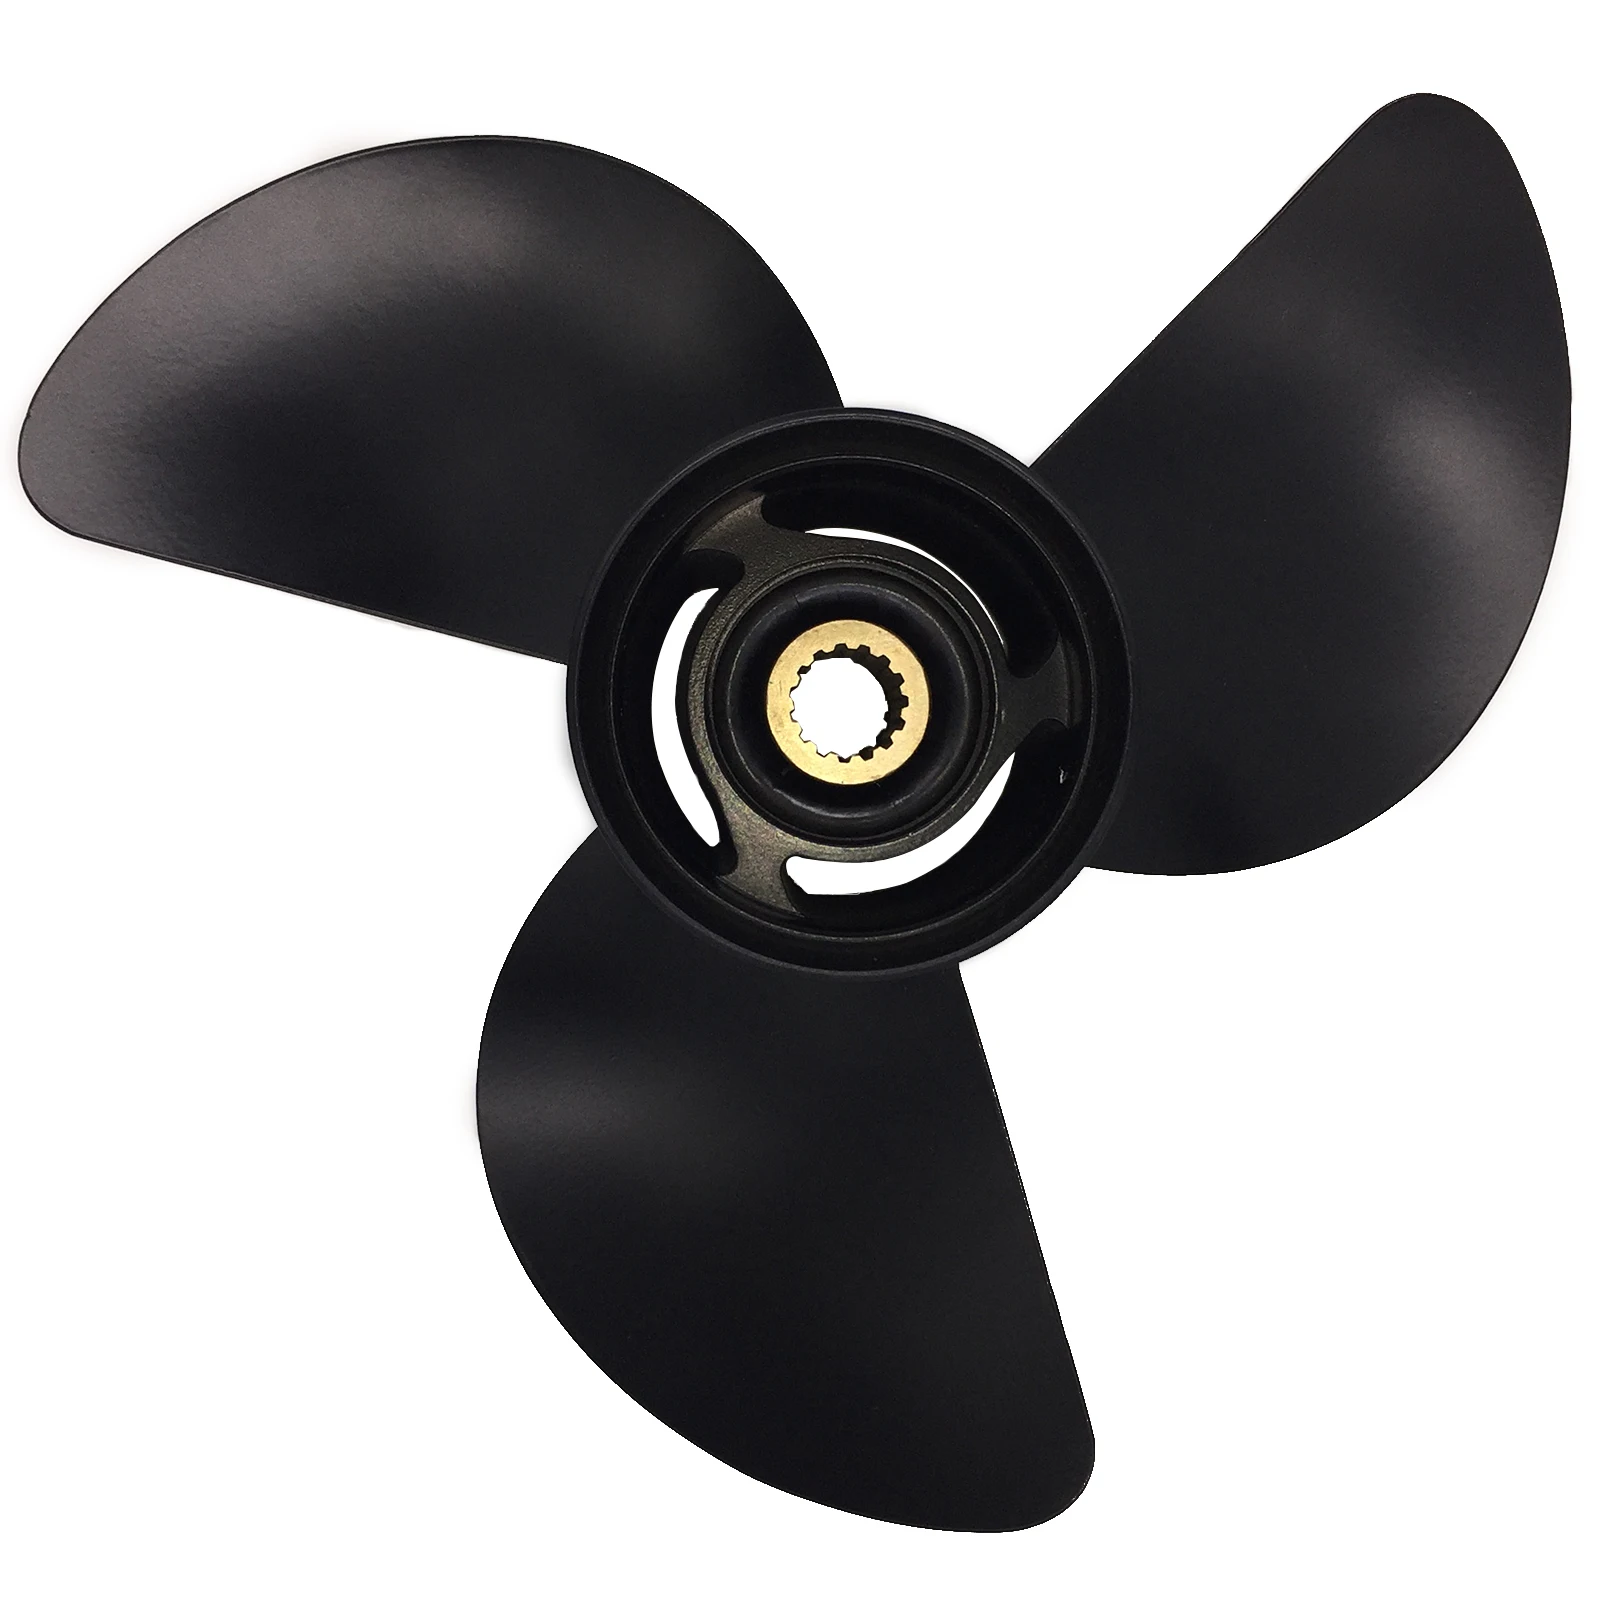 Boat Propeller 14x11 for Tohatsu 60HP-125HP 3 Blades Aluminum 15 Tooth RH OEM NO: 3HKB64523-0 14x11